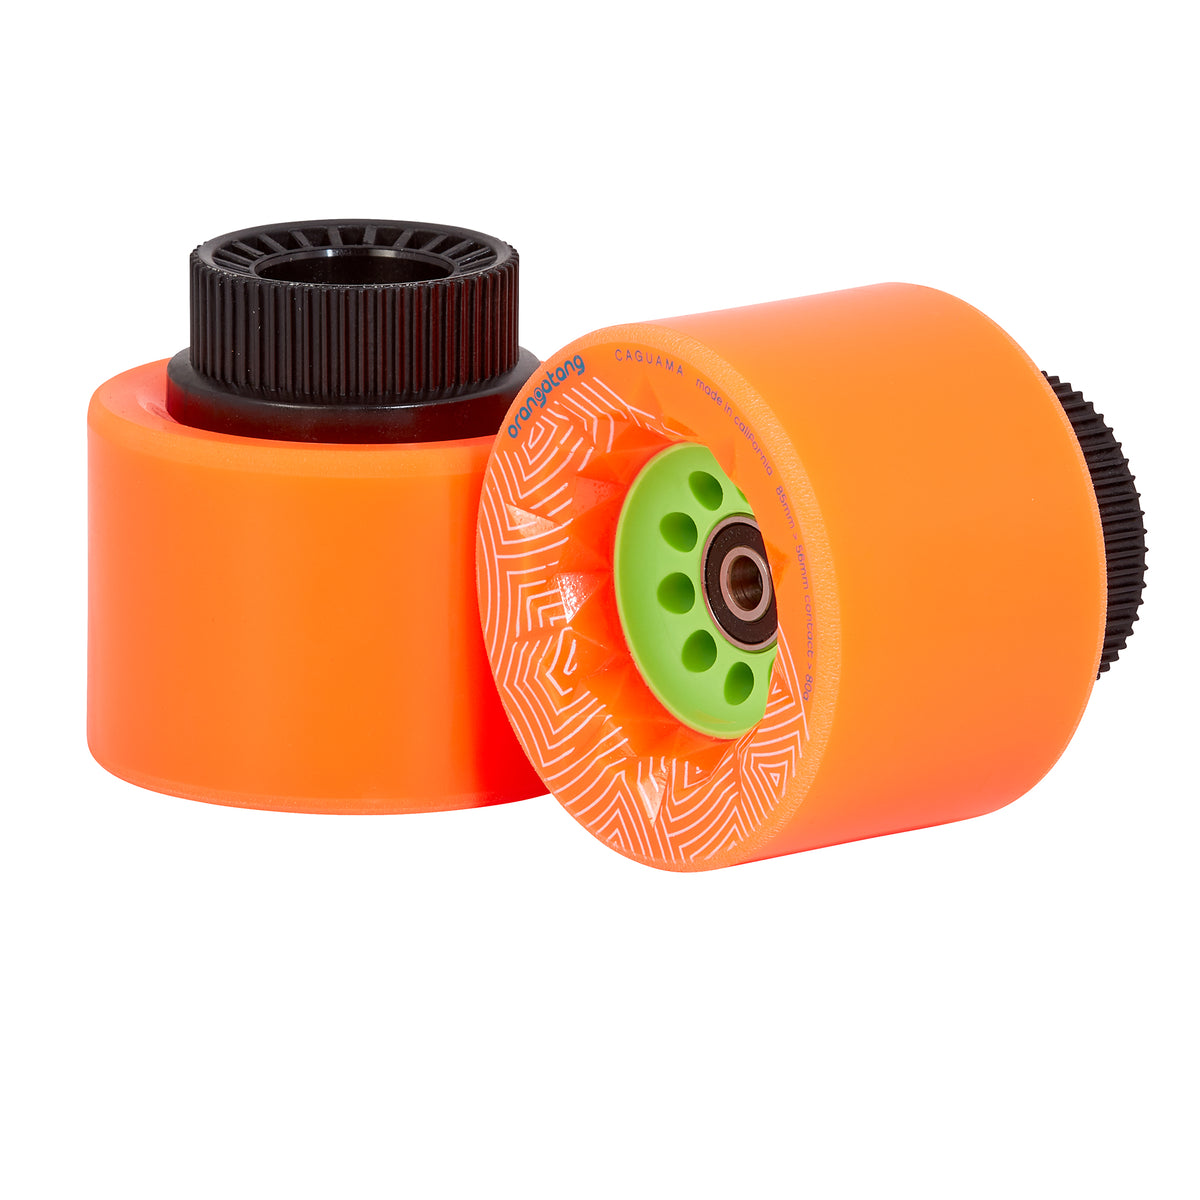 Boosted Loaded Caguama 85mm 80a Wheels W / Pulleys - Orange